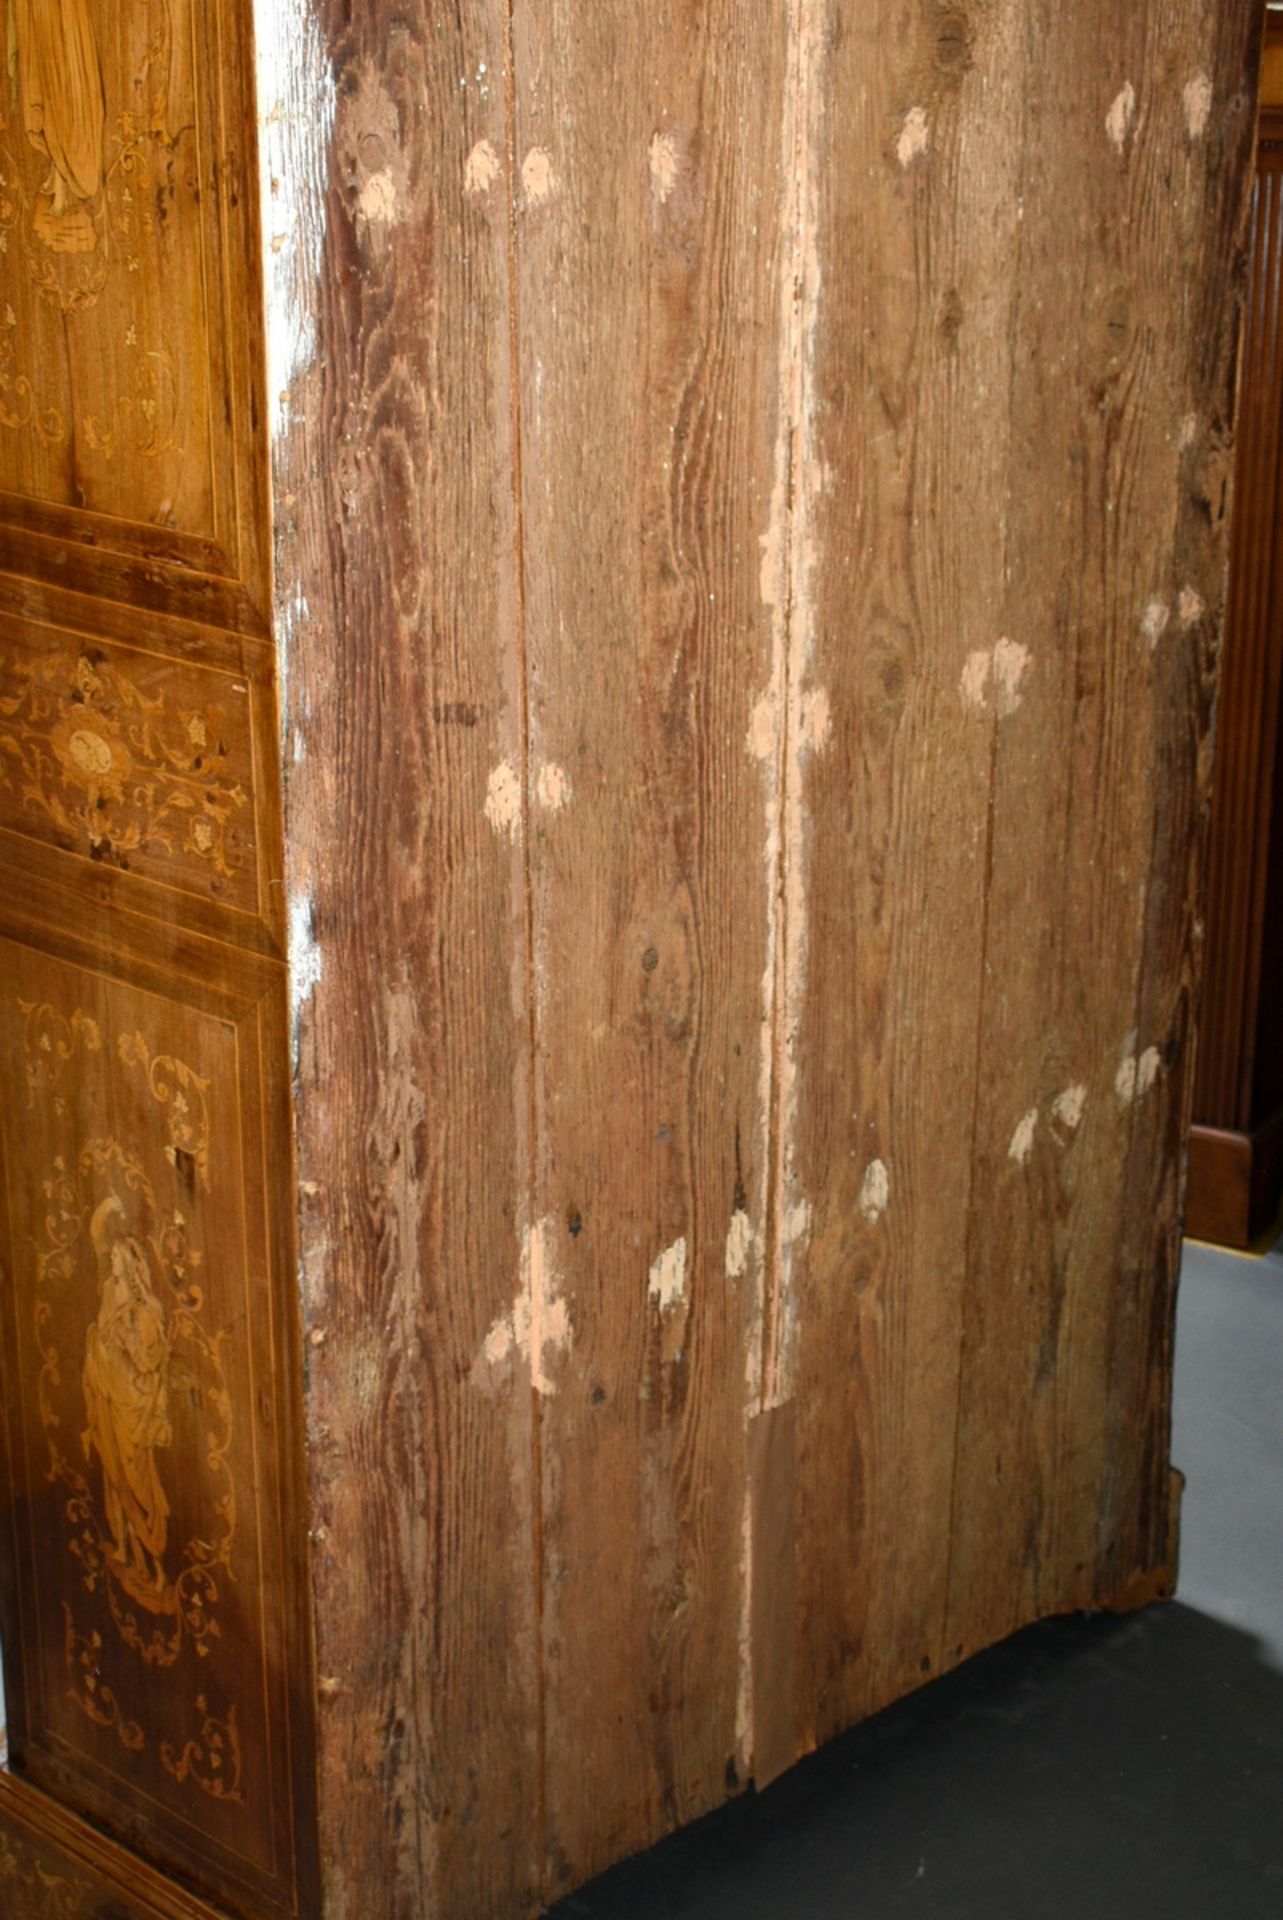 Splendid single-door cabinet with detailed inlays "Allegorical female figures" in classicistic orna - Image 8 of 13